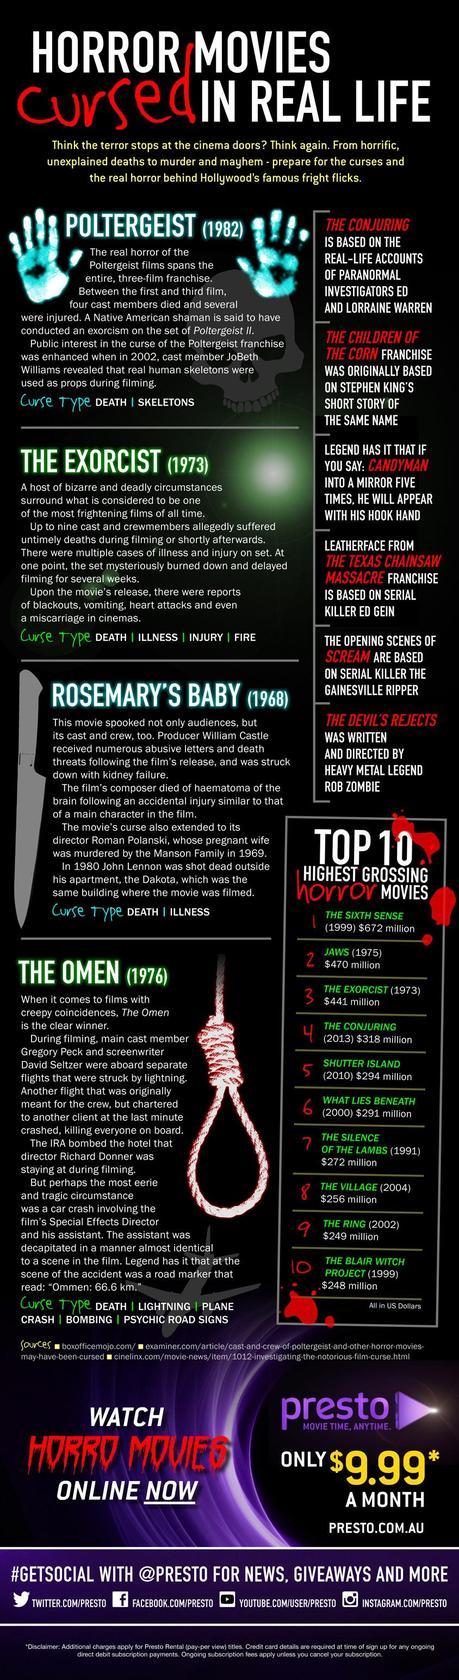 The Real Horror Behind Four Famous Movies Infographic